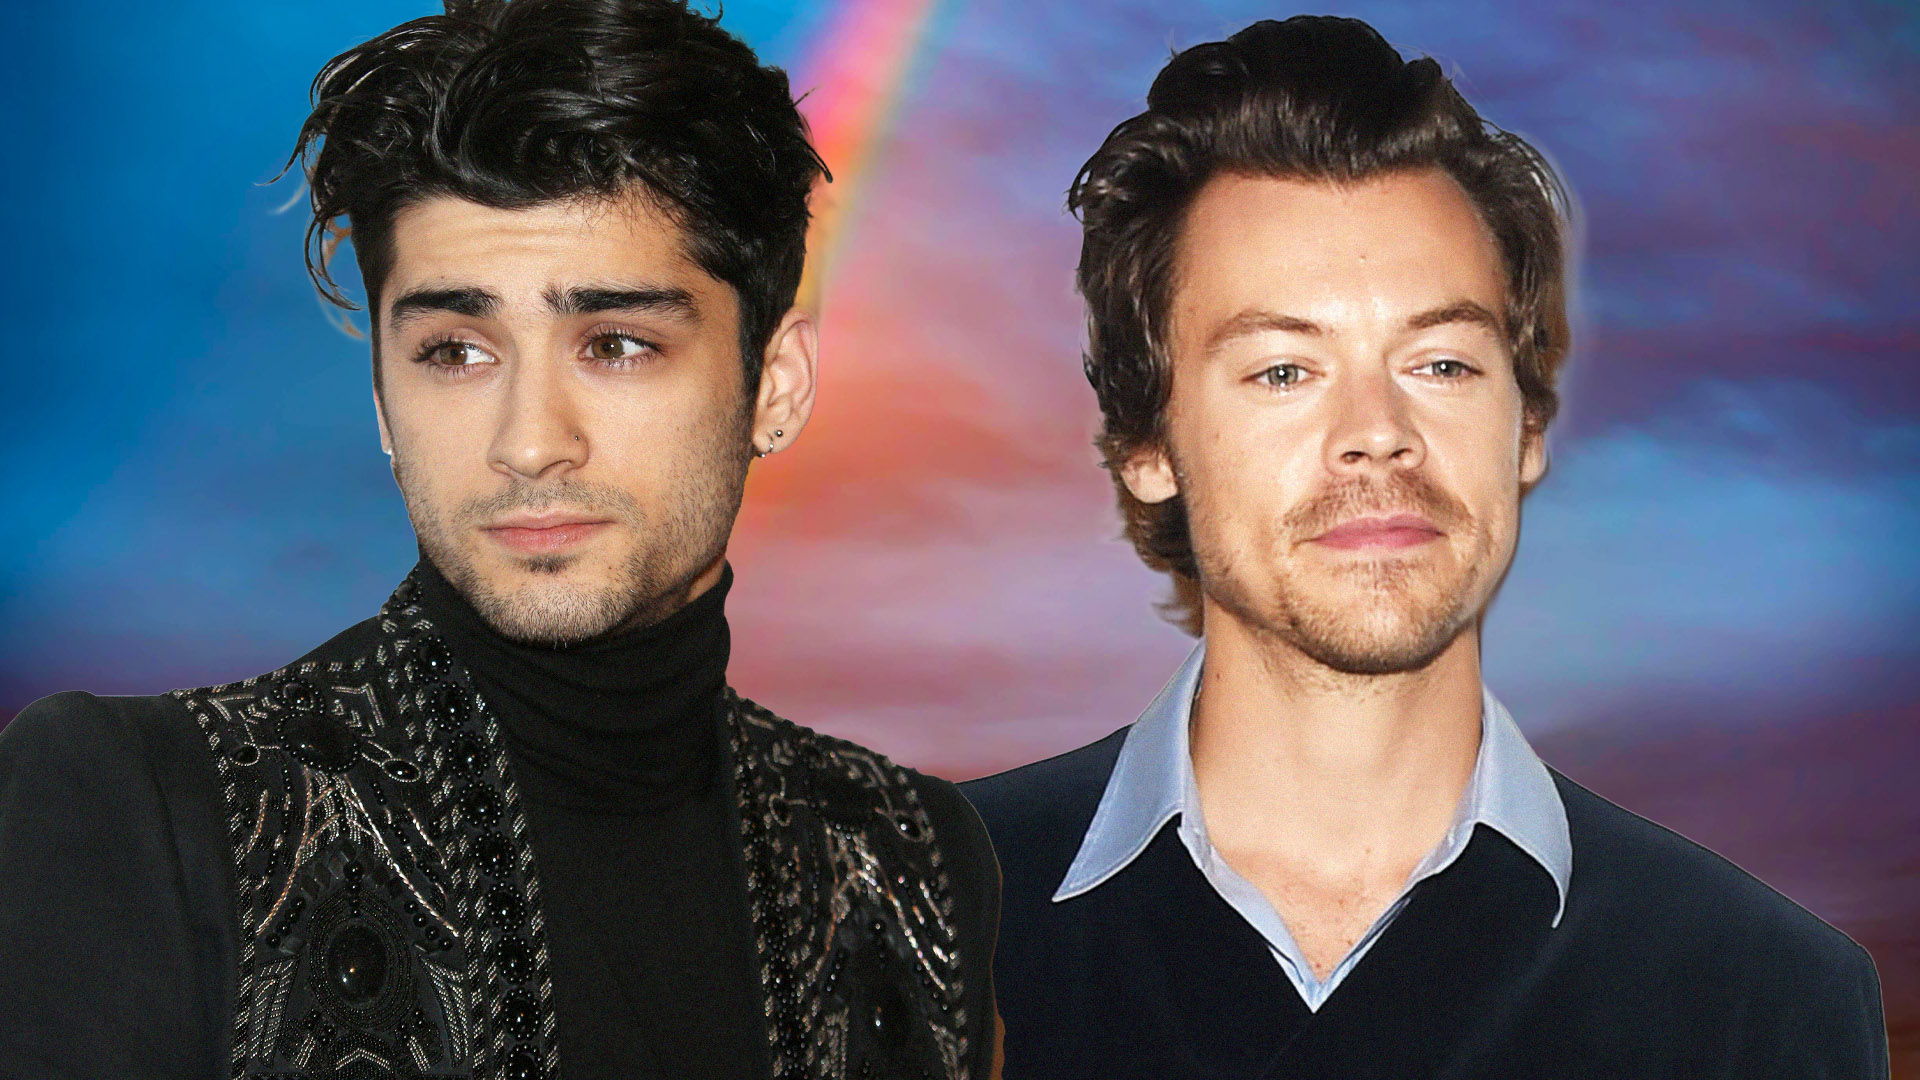 There's a Clear Winner in the Unspoken Faceoff Between Harry Styles & Zayn